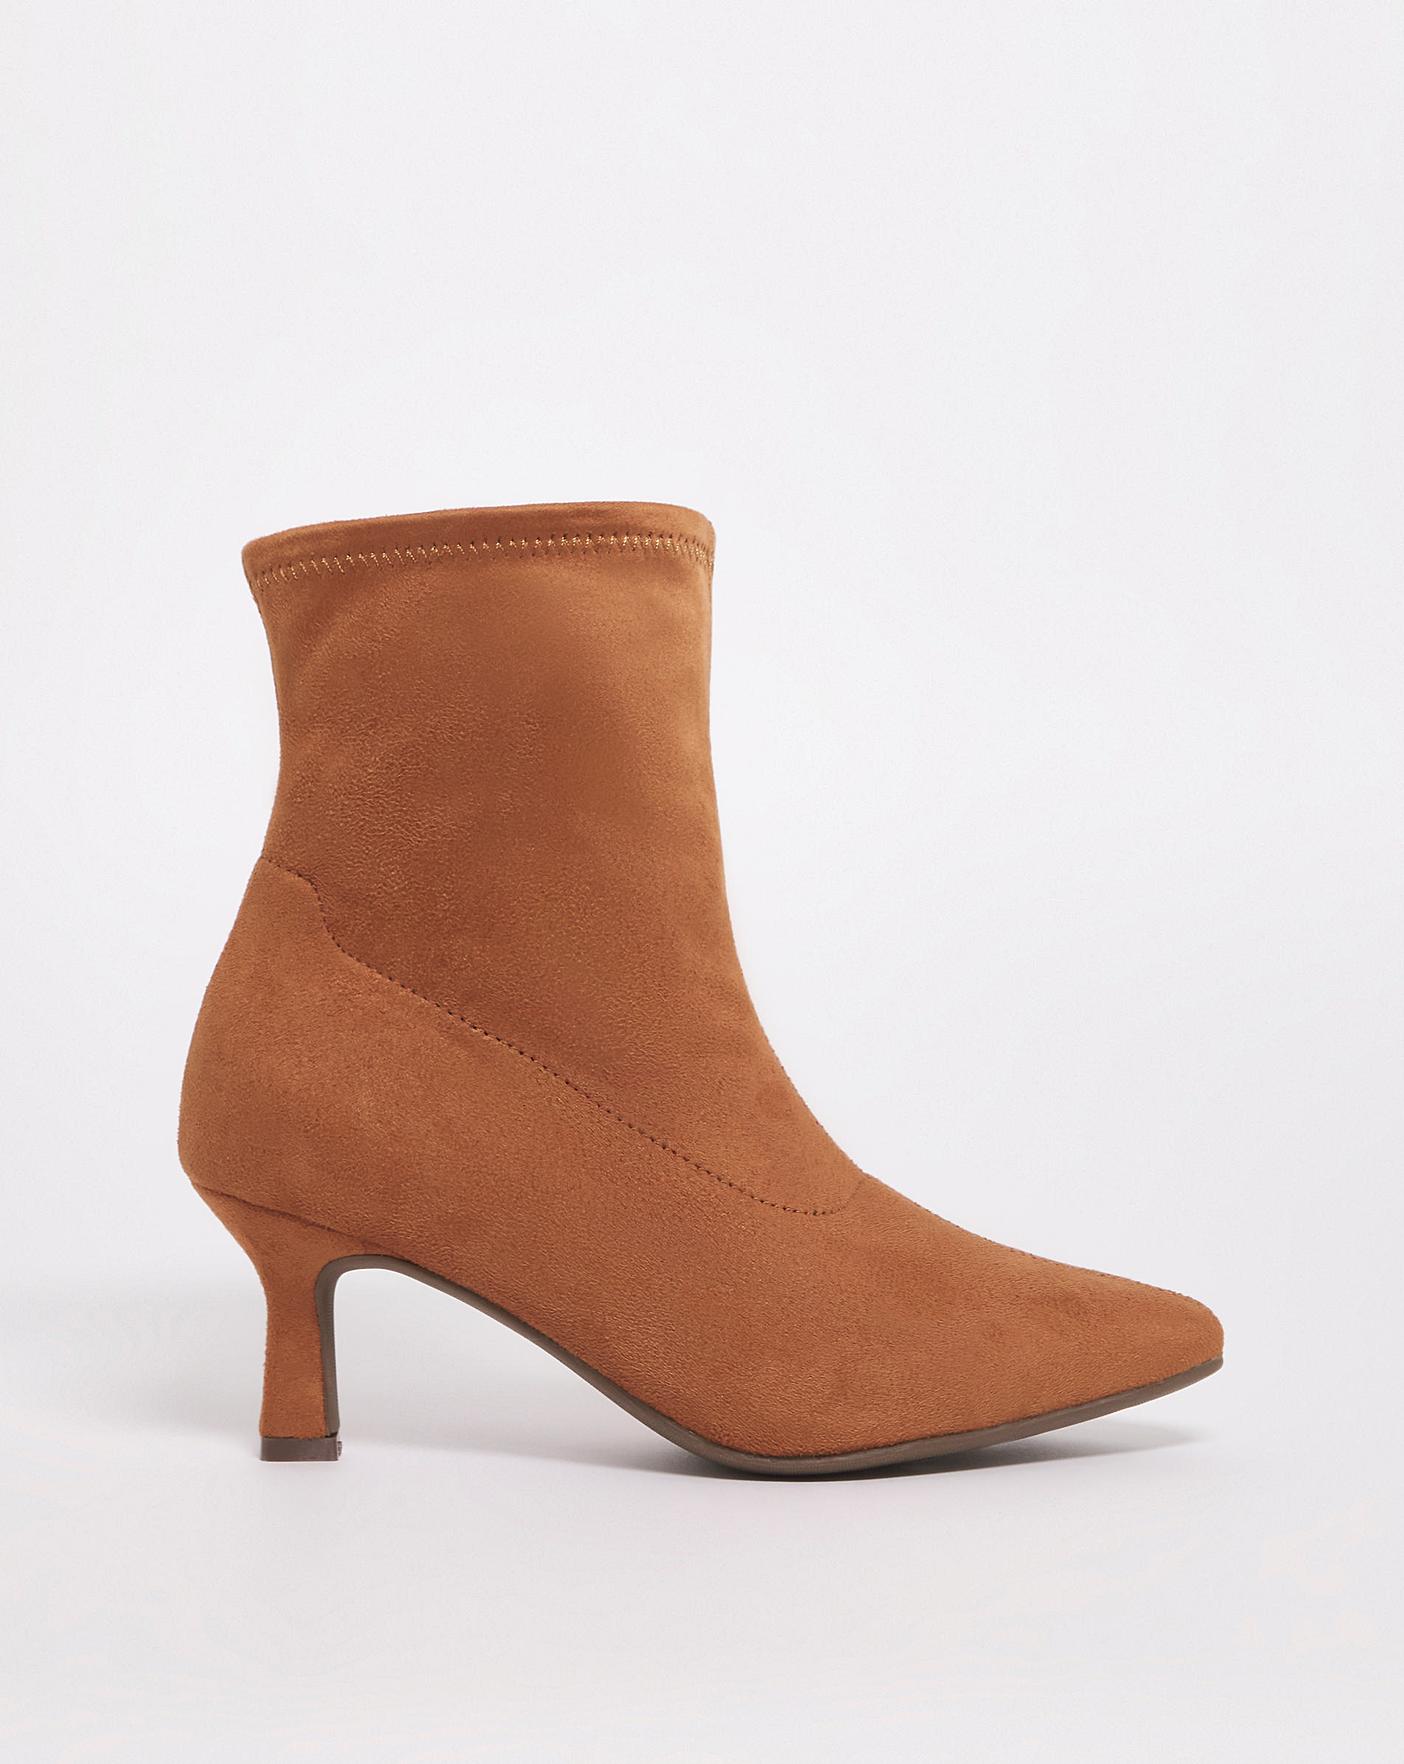 Tweed Metal Toe Cap Low Stiletto Pointed Toe Ankle Boots | boohoo